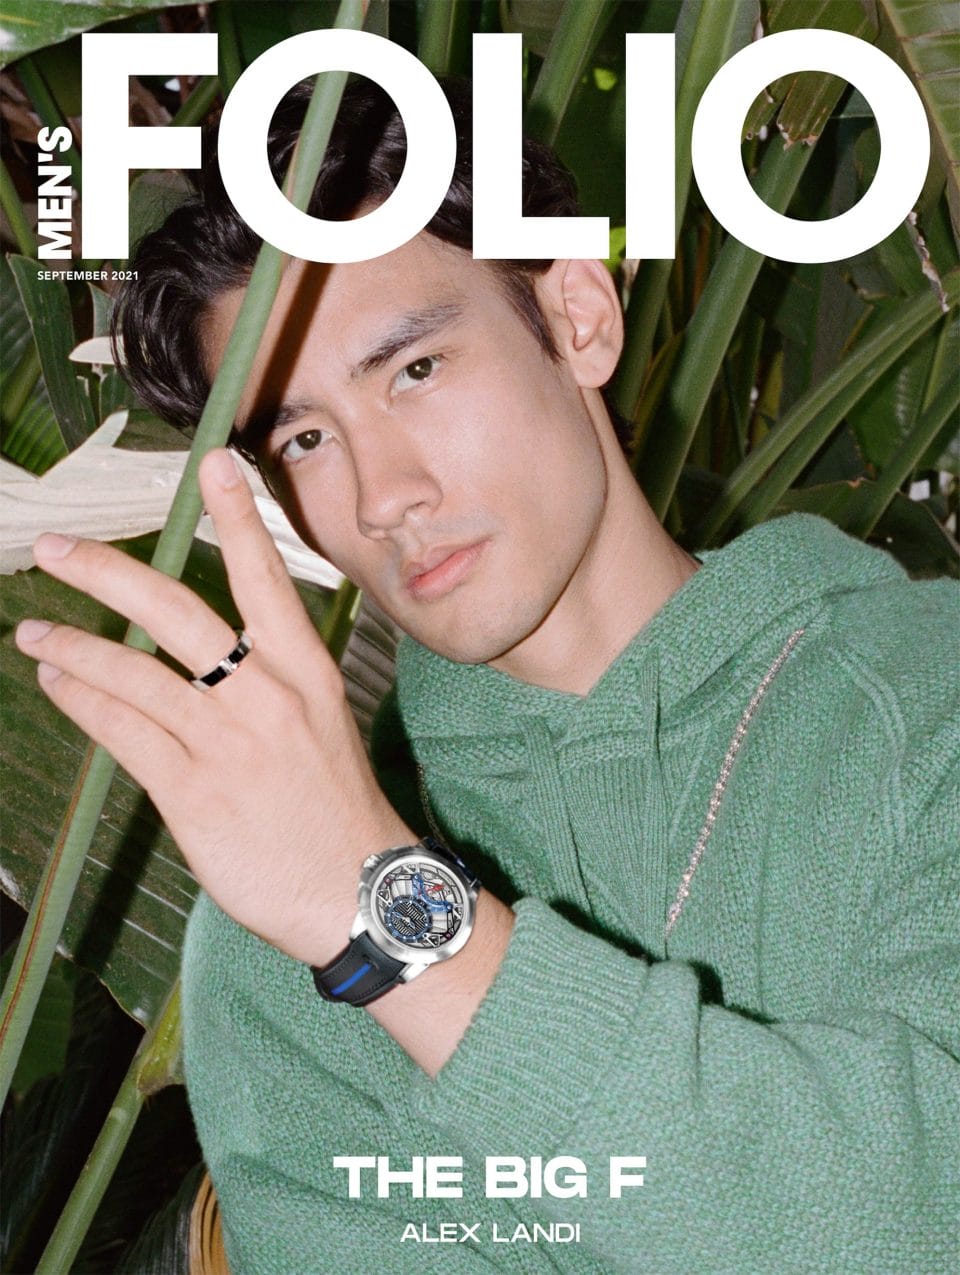 Introducing Alex Landi, Our September '21 Cover Star